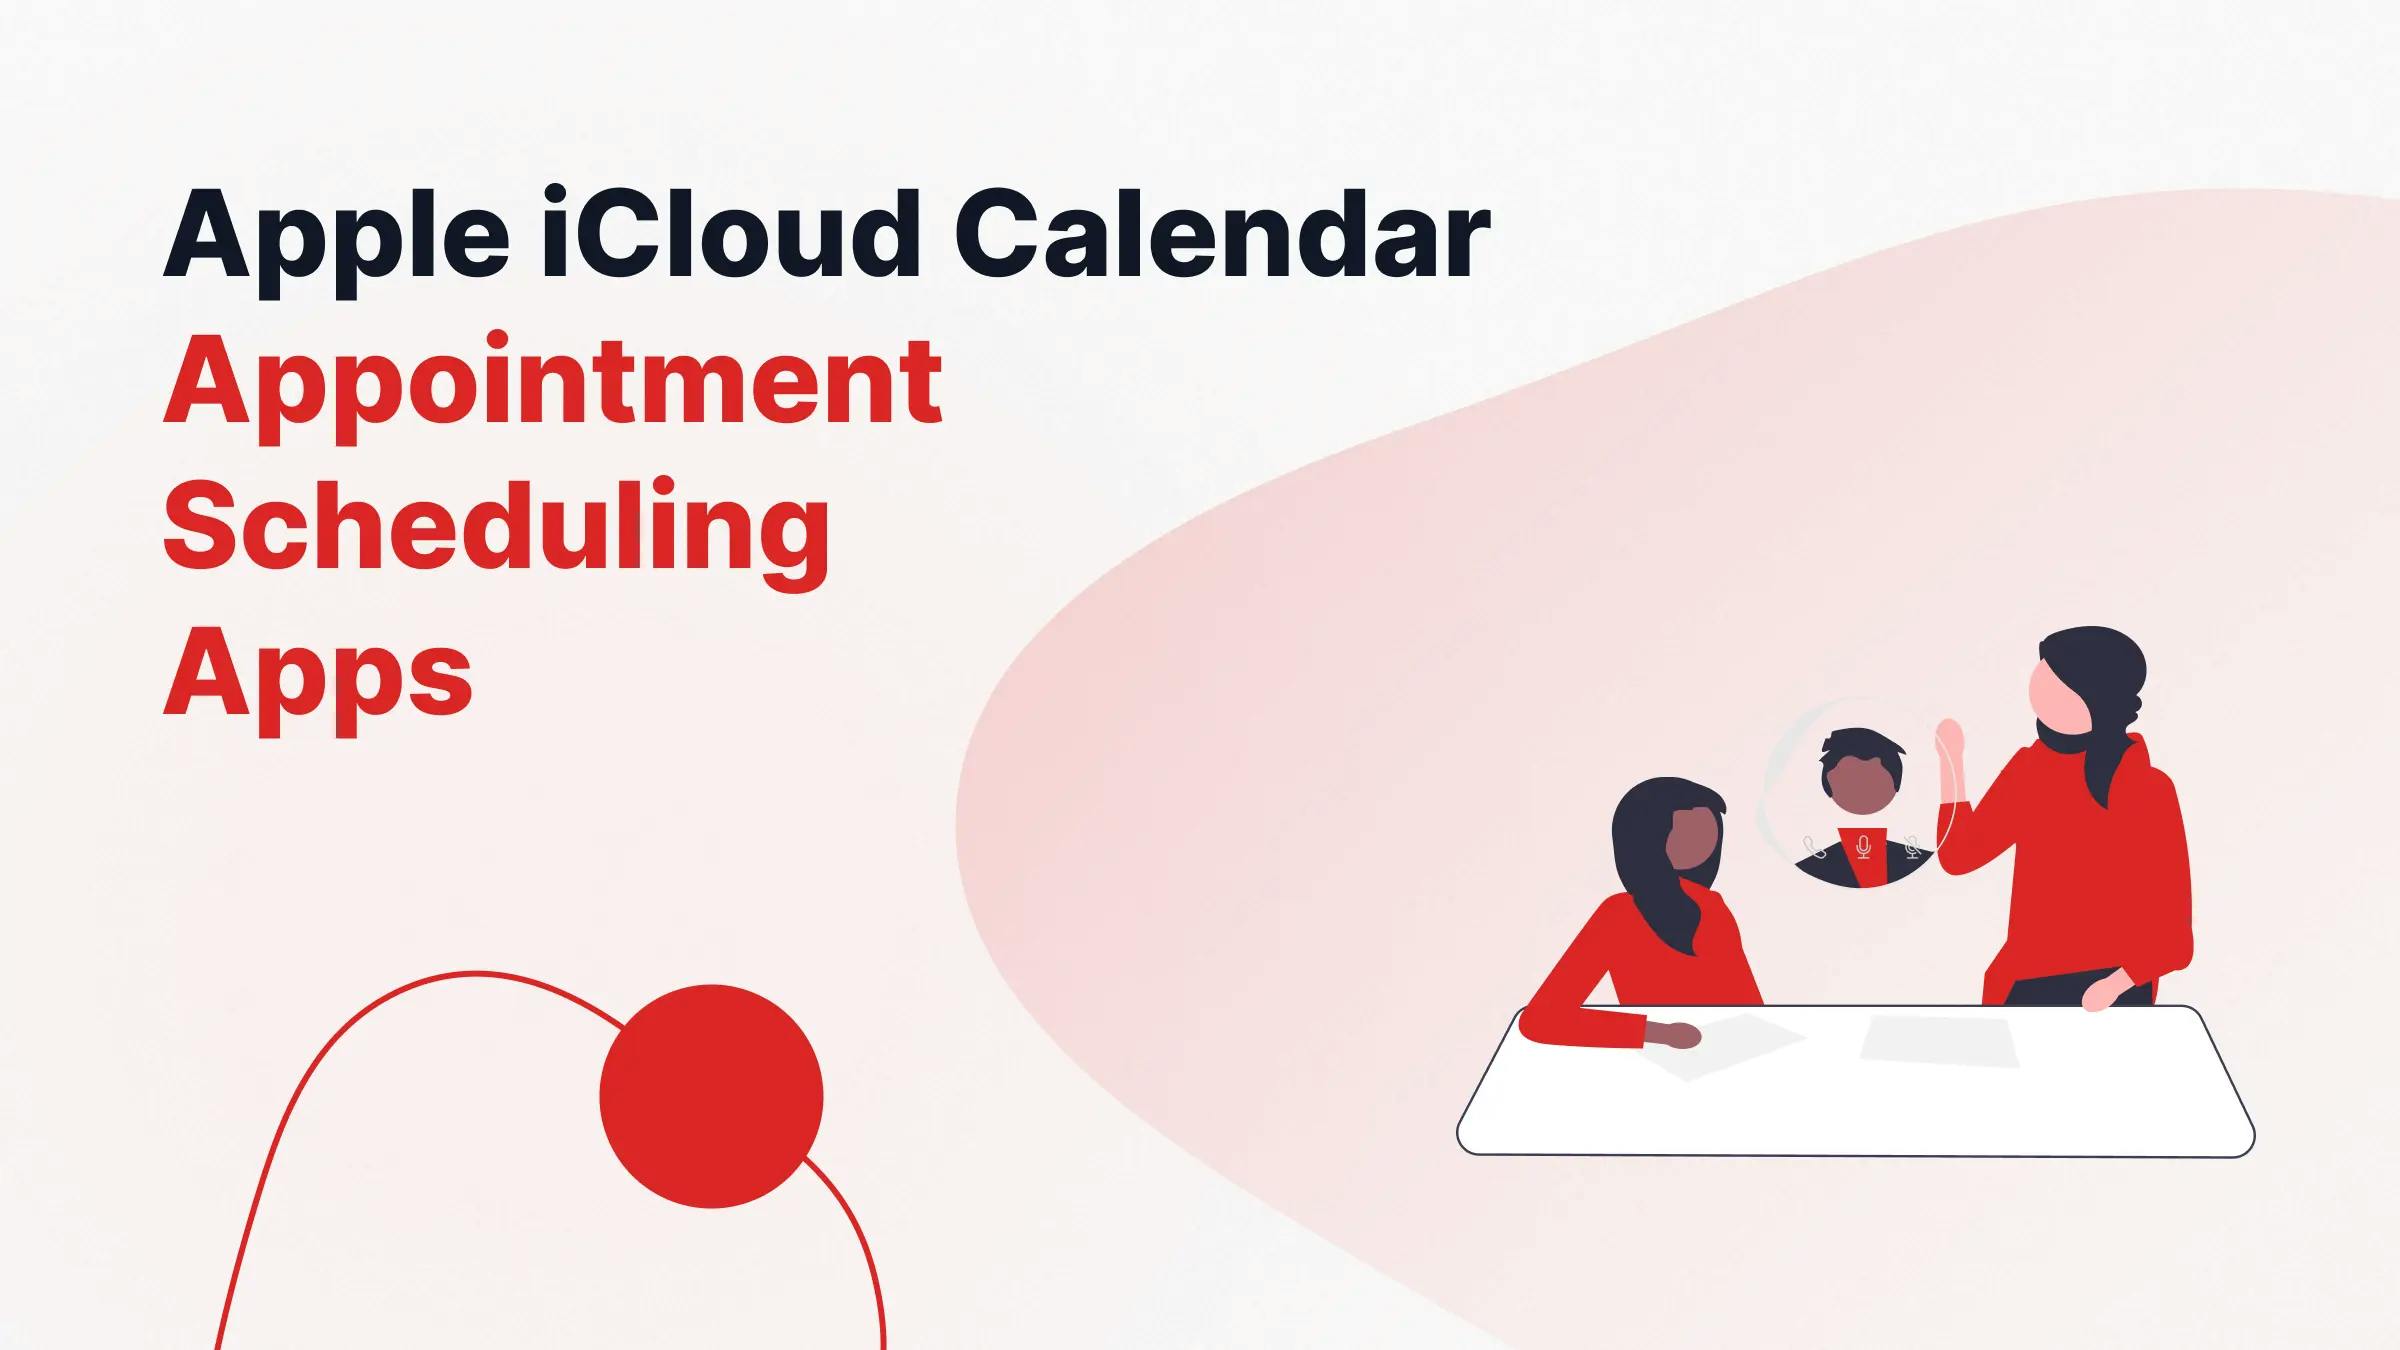 Apple iCloud Calendar Appointment Scheduling Apps